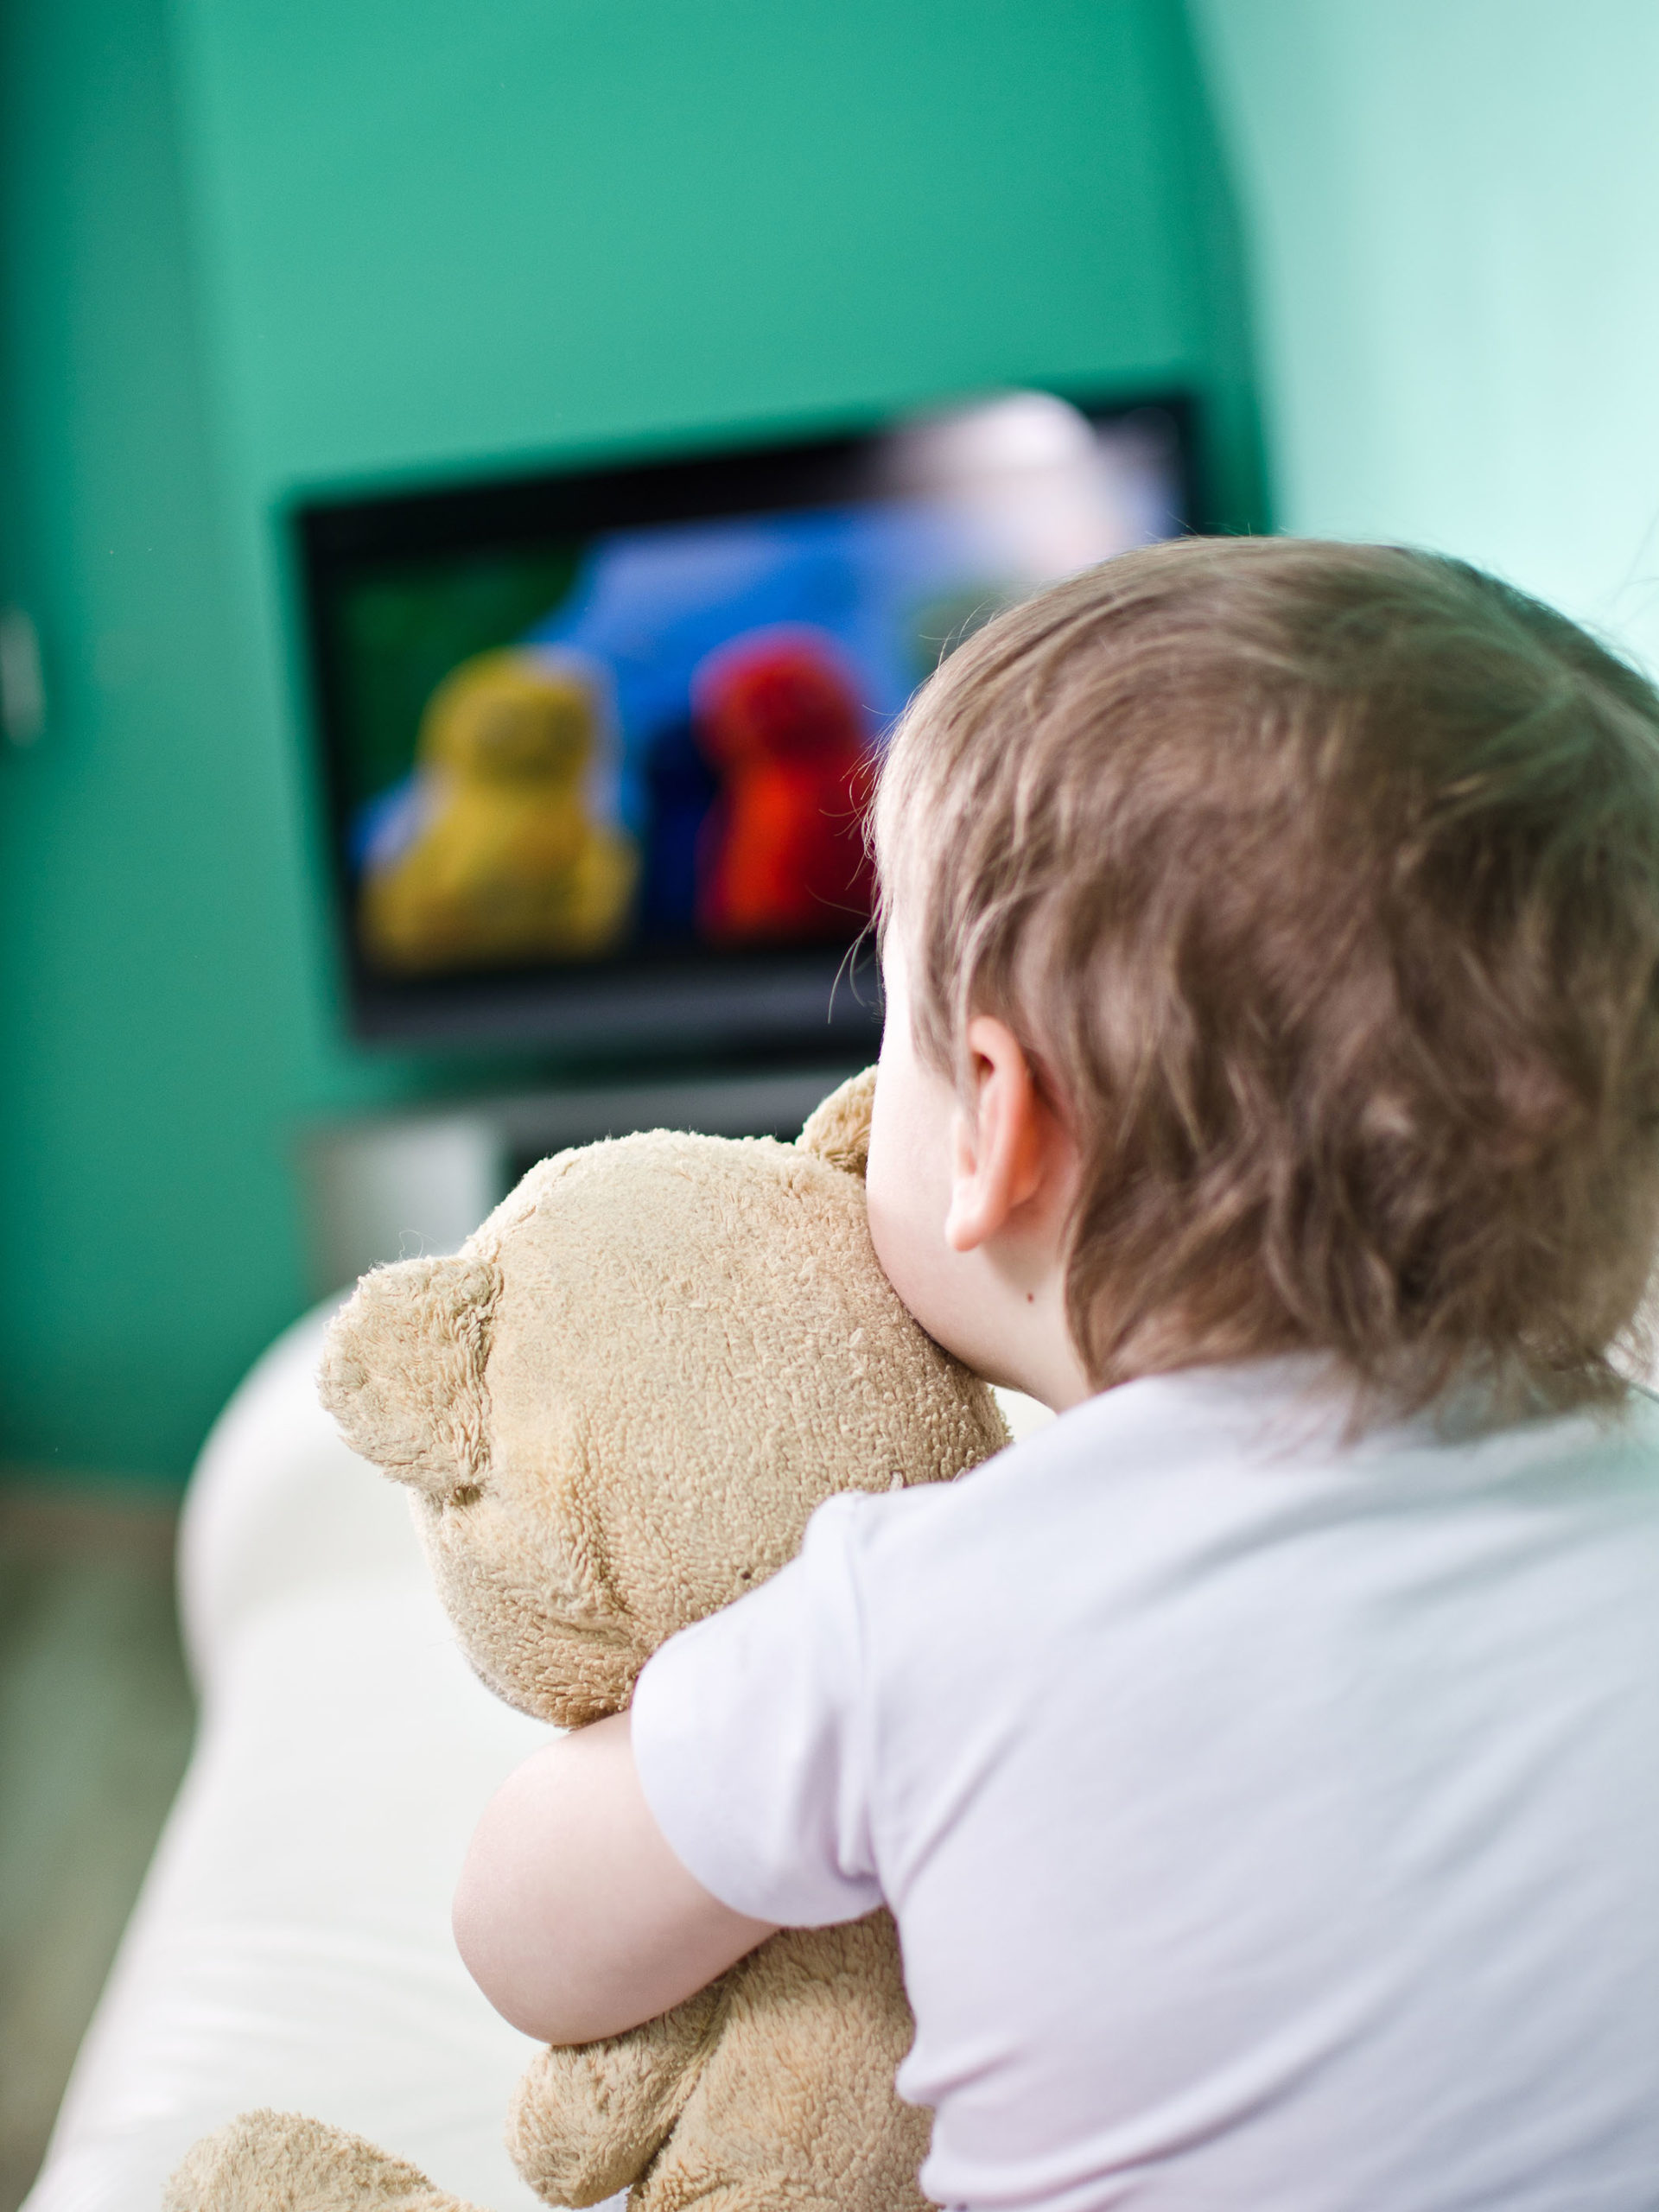 young boy and his teddy bear watching TV